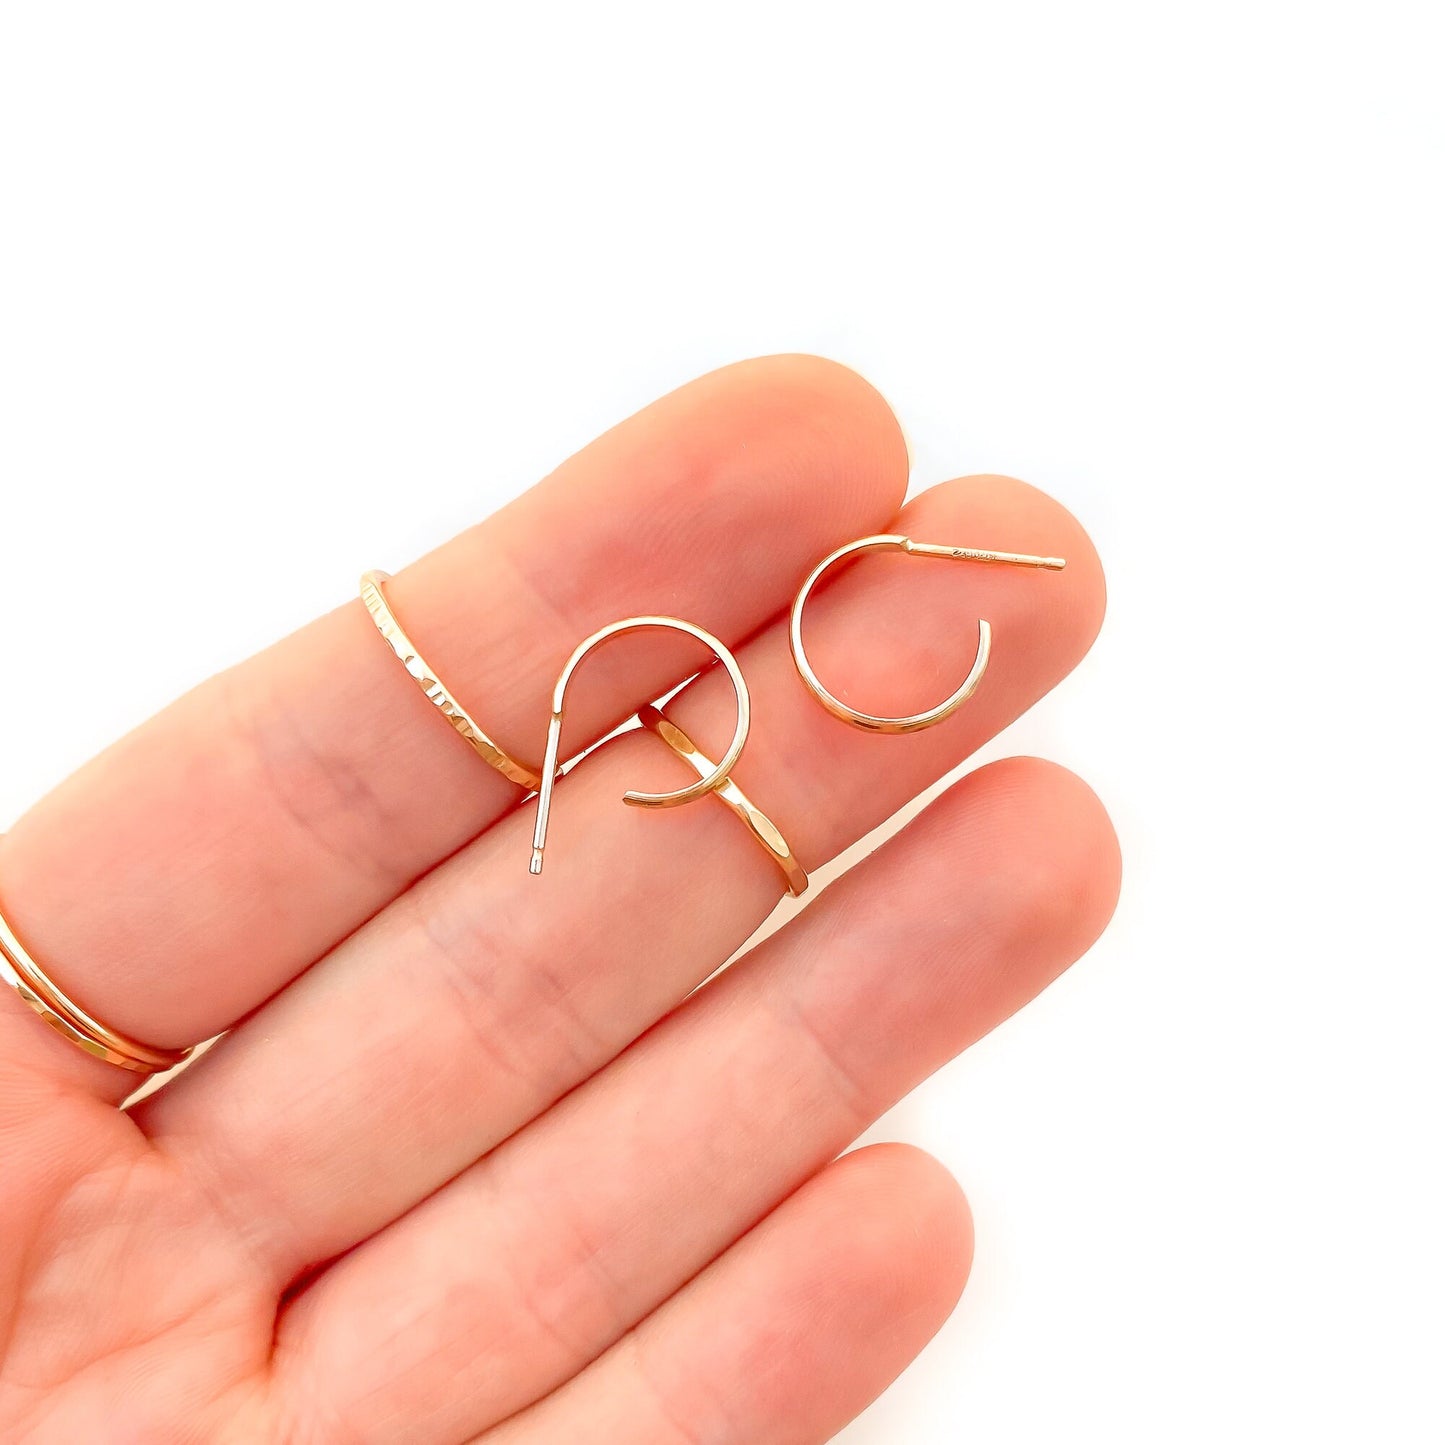 Hoop Earrings With Post, 14K Gold Filled